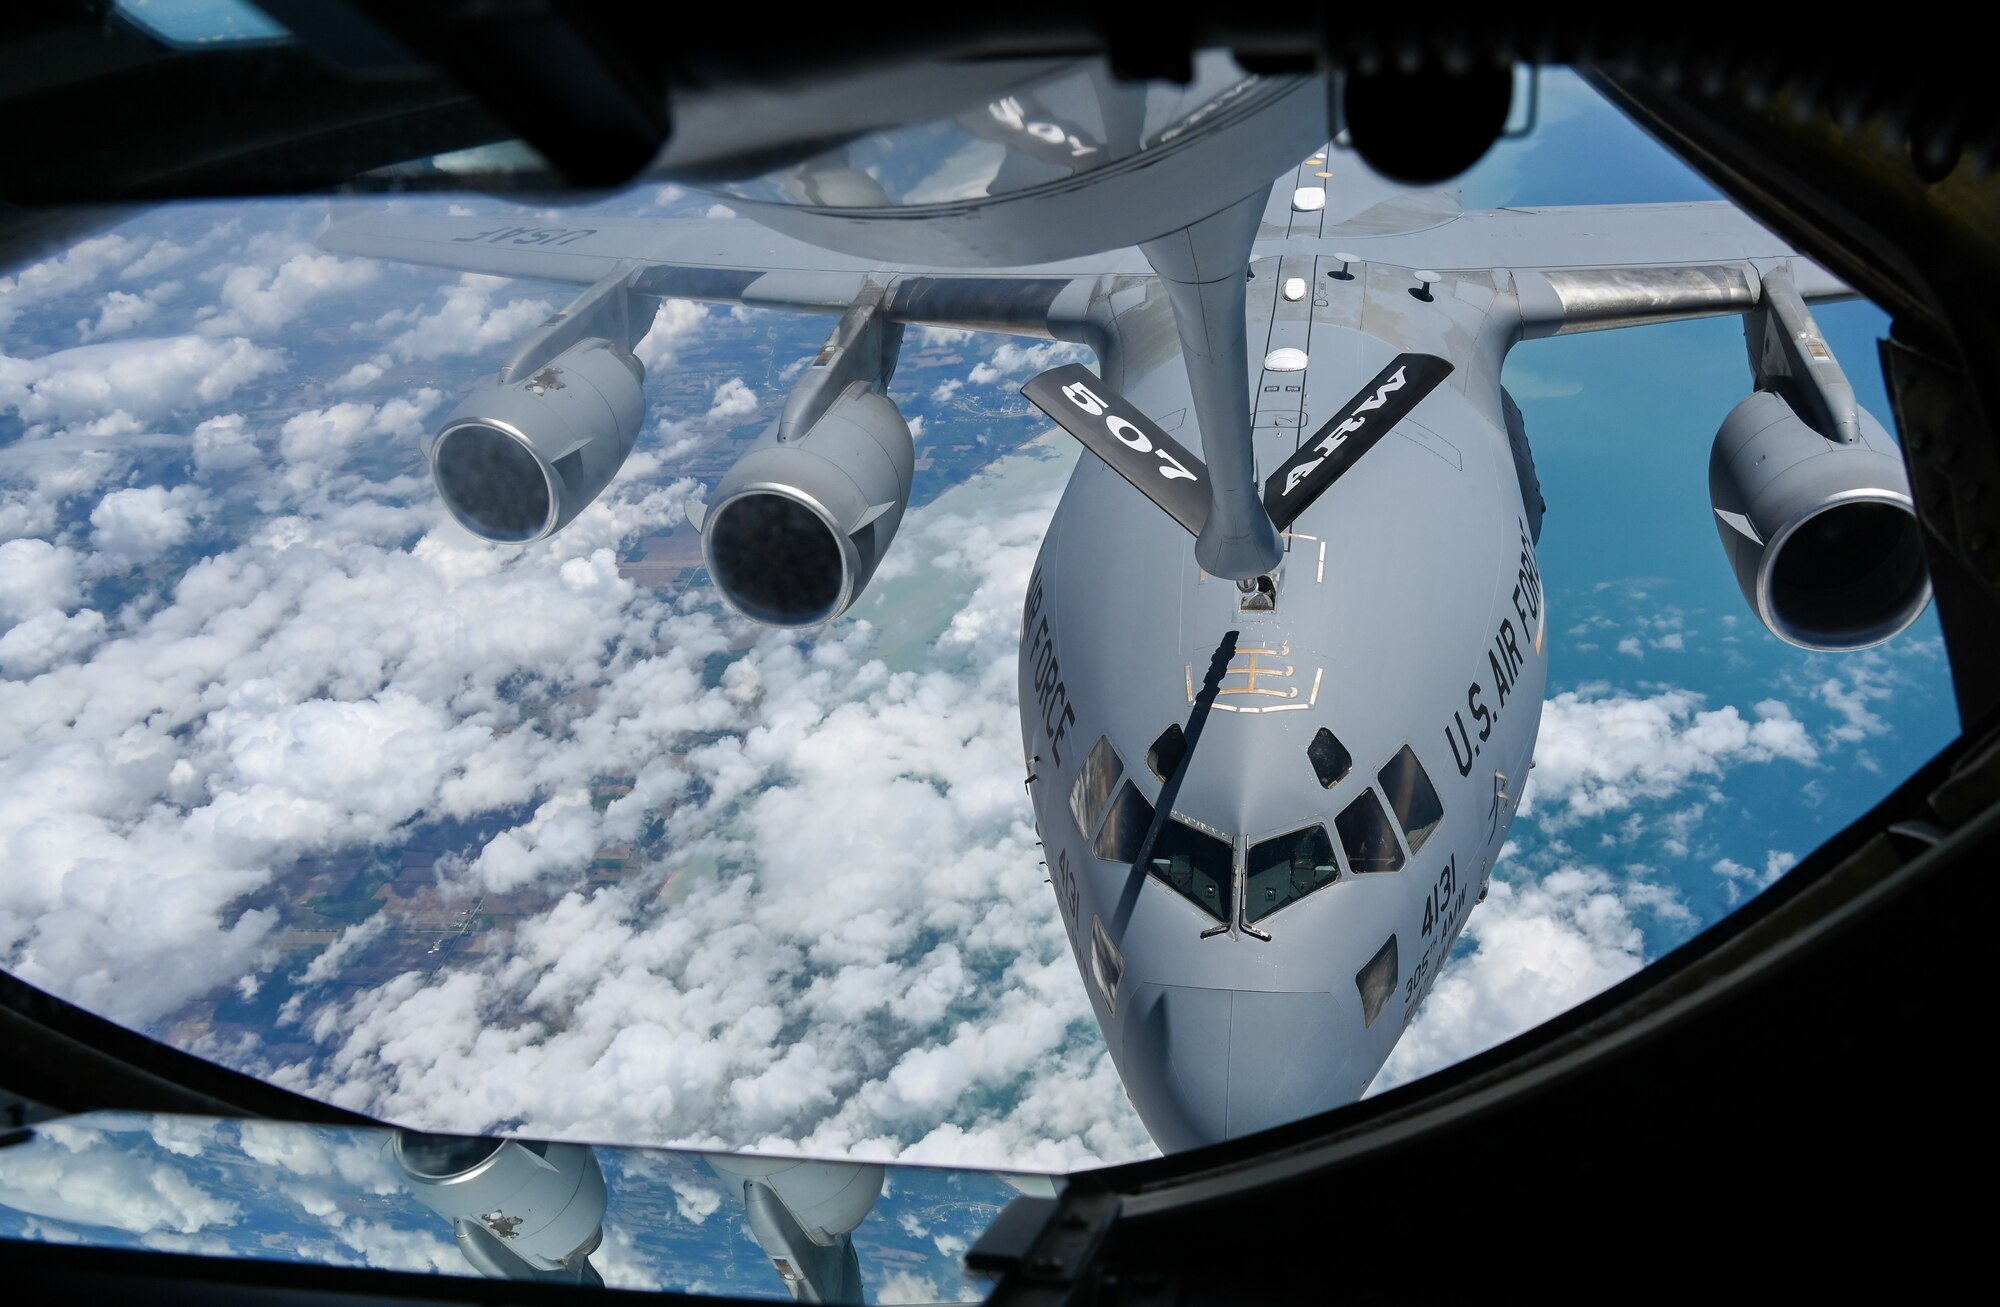 A C-17 Globemaster assigned to the 305th Air Mobility Wing, Joint Base McGuire-Dix-Lakehurst, New Jersey, refuels with a KC-135 Stratotanker from the 465th Air Refueling Squadron, Tinker Air Force Base, Oklahoma, over the Atlantic Ocean, June 9, 2022. (U.S. Air Force photo by 2nd Lt. Mary Begy)